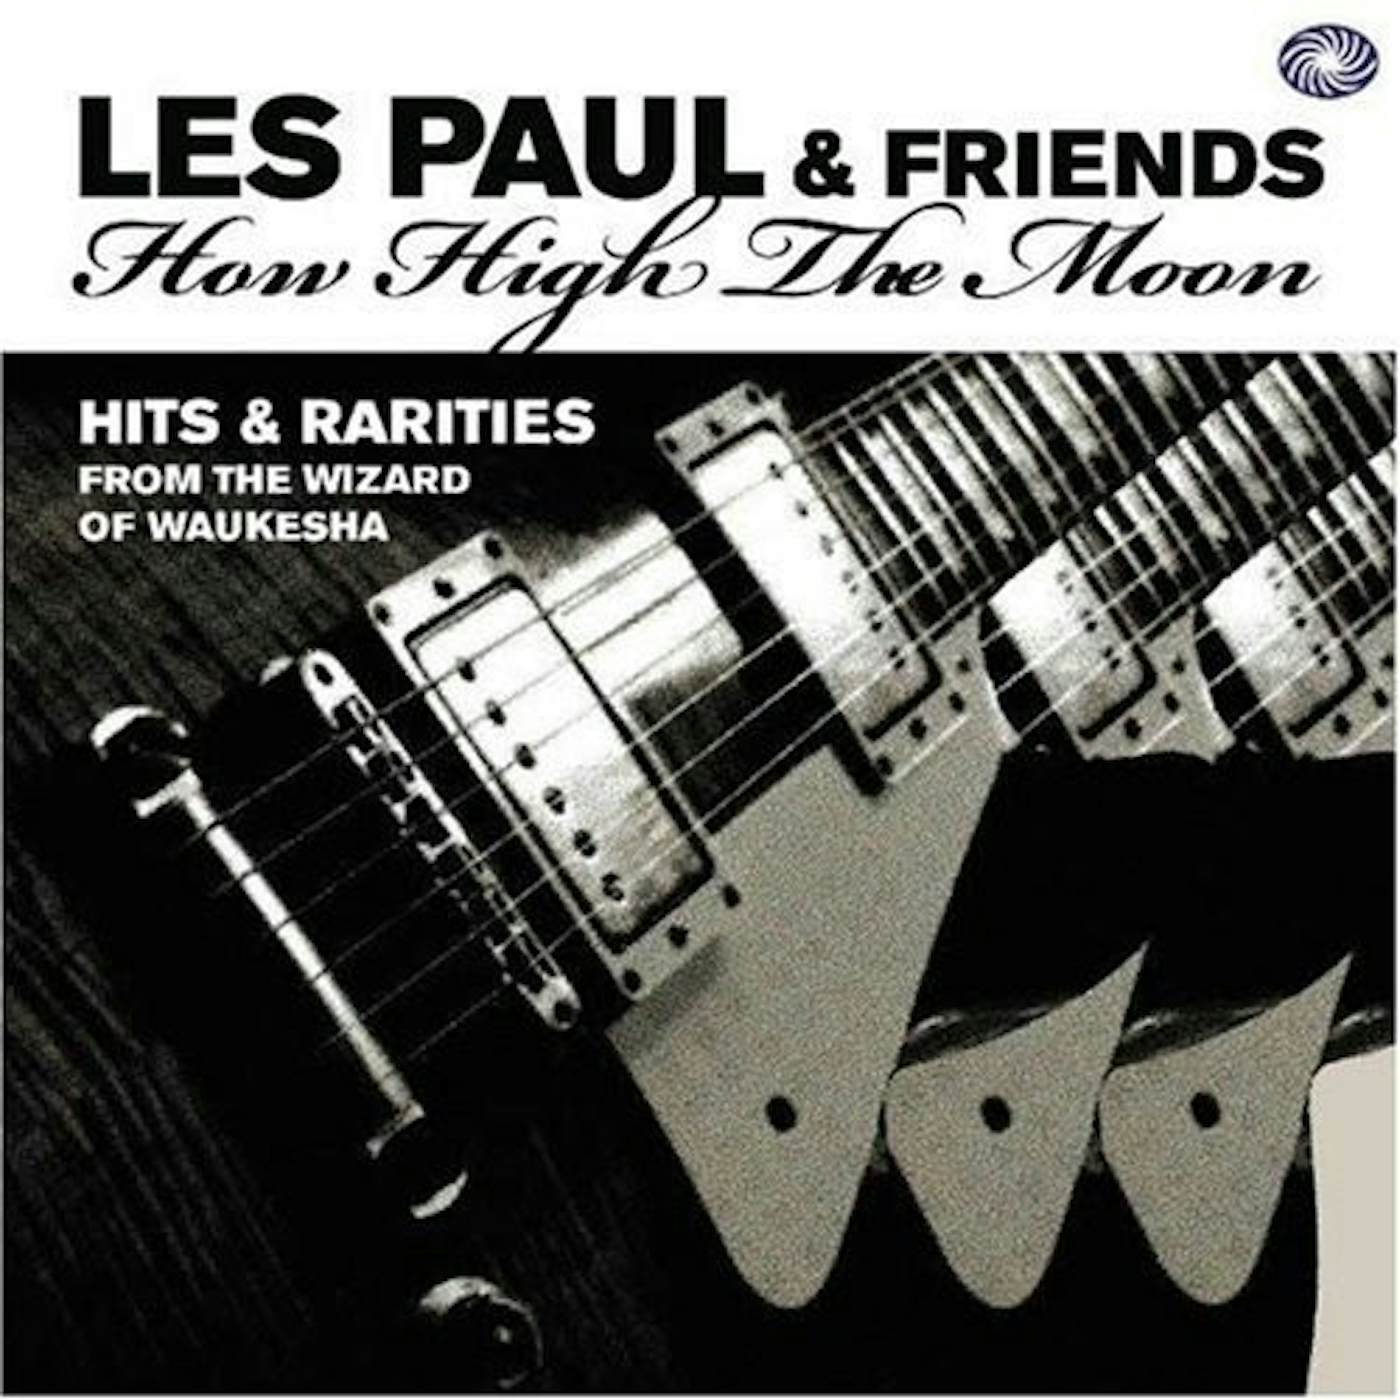 Les Paul HOW HIGH THE MOON: HITS & RARITIES FROM THE WIZARD CD